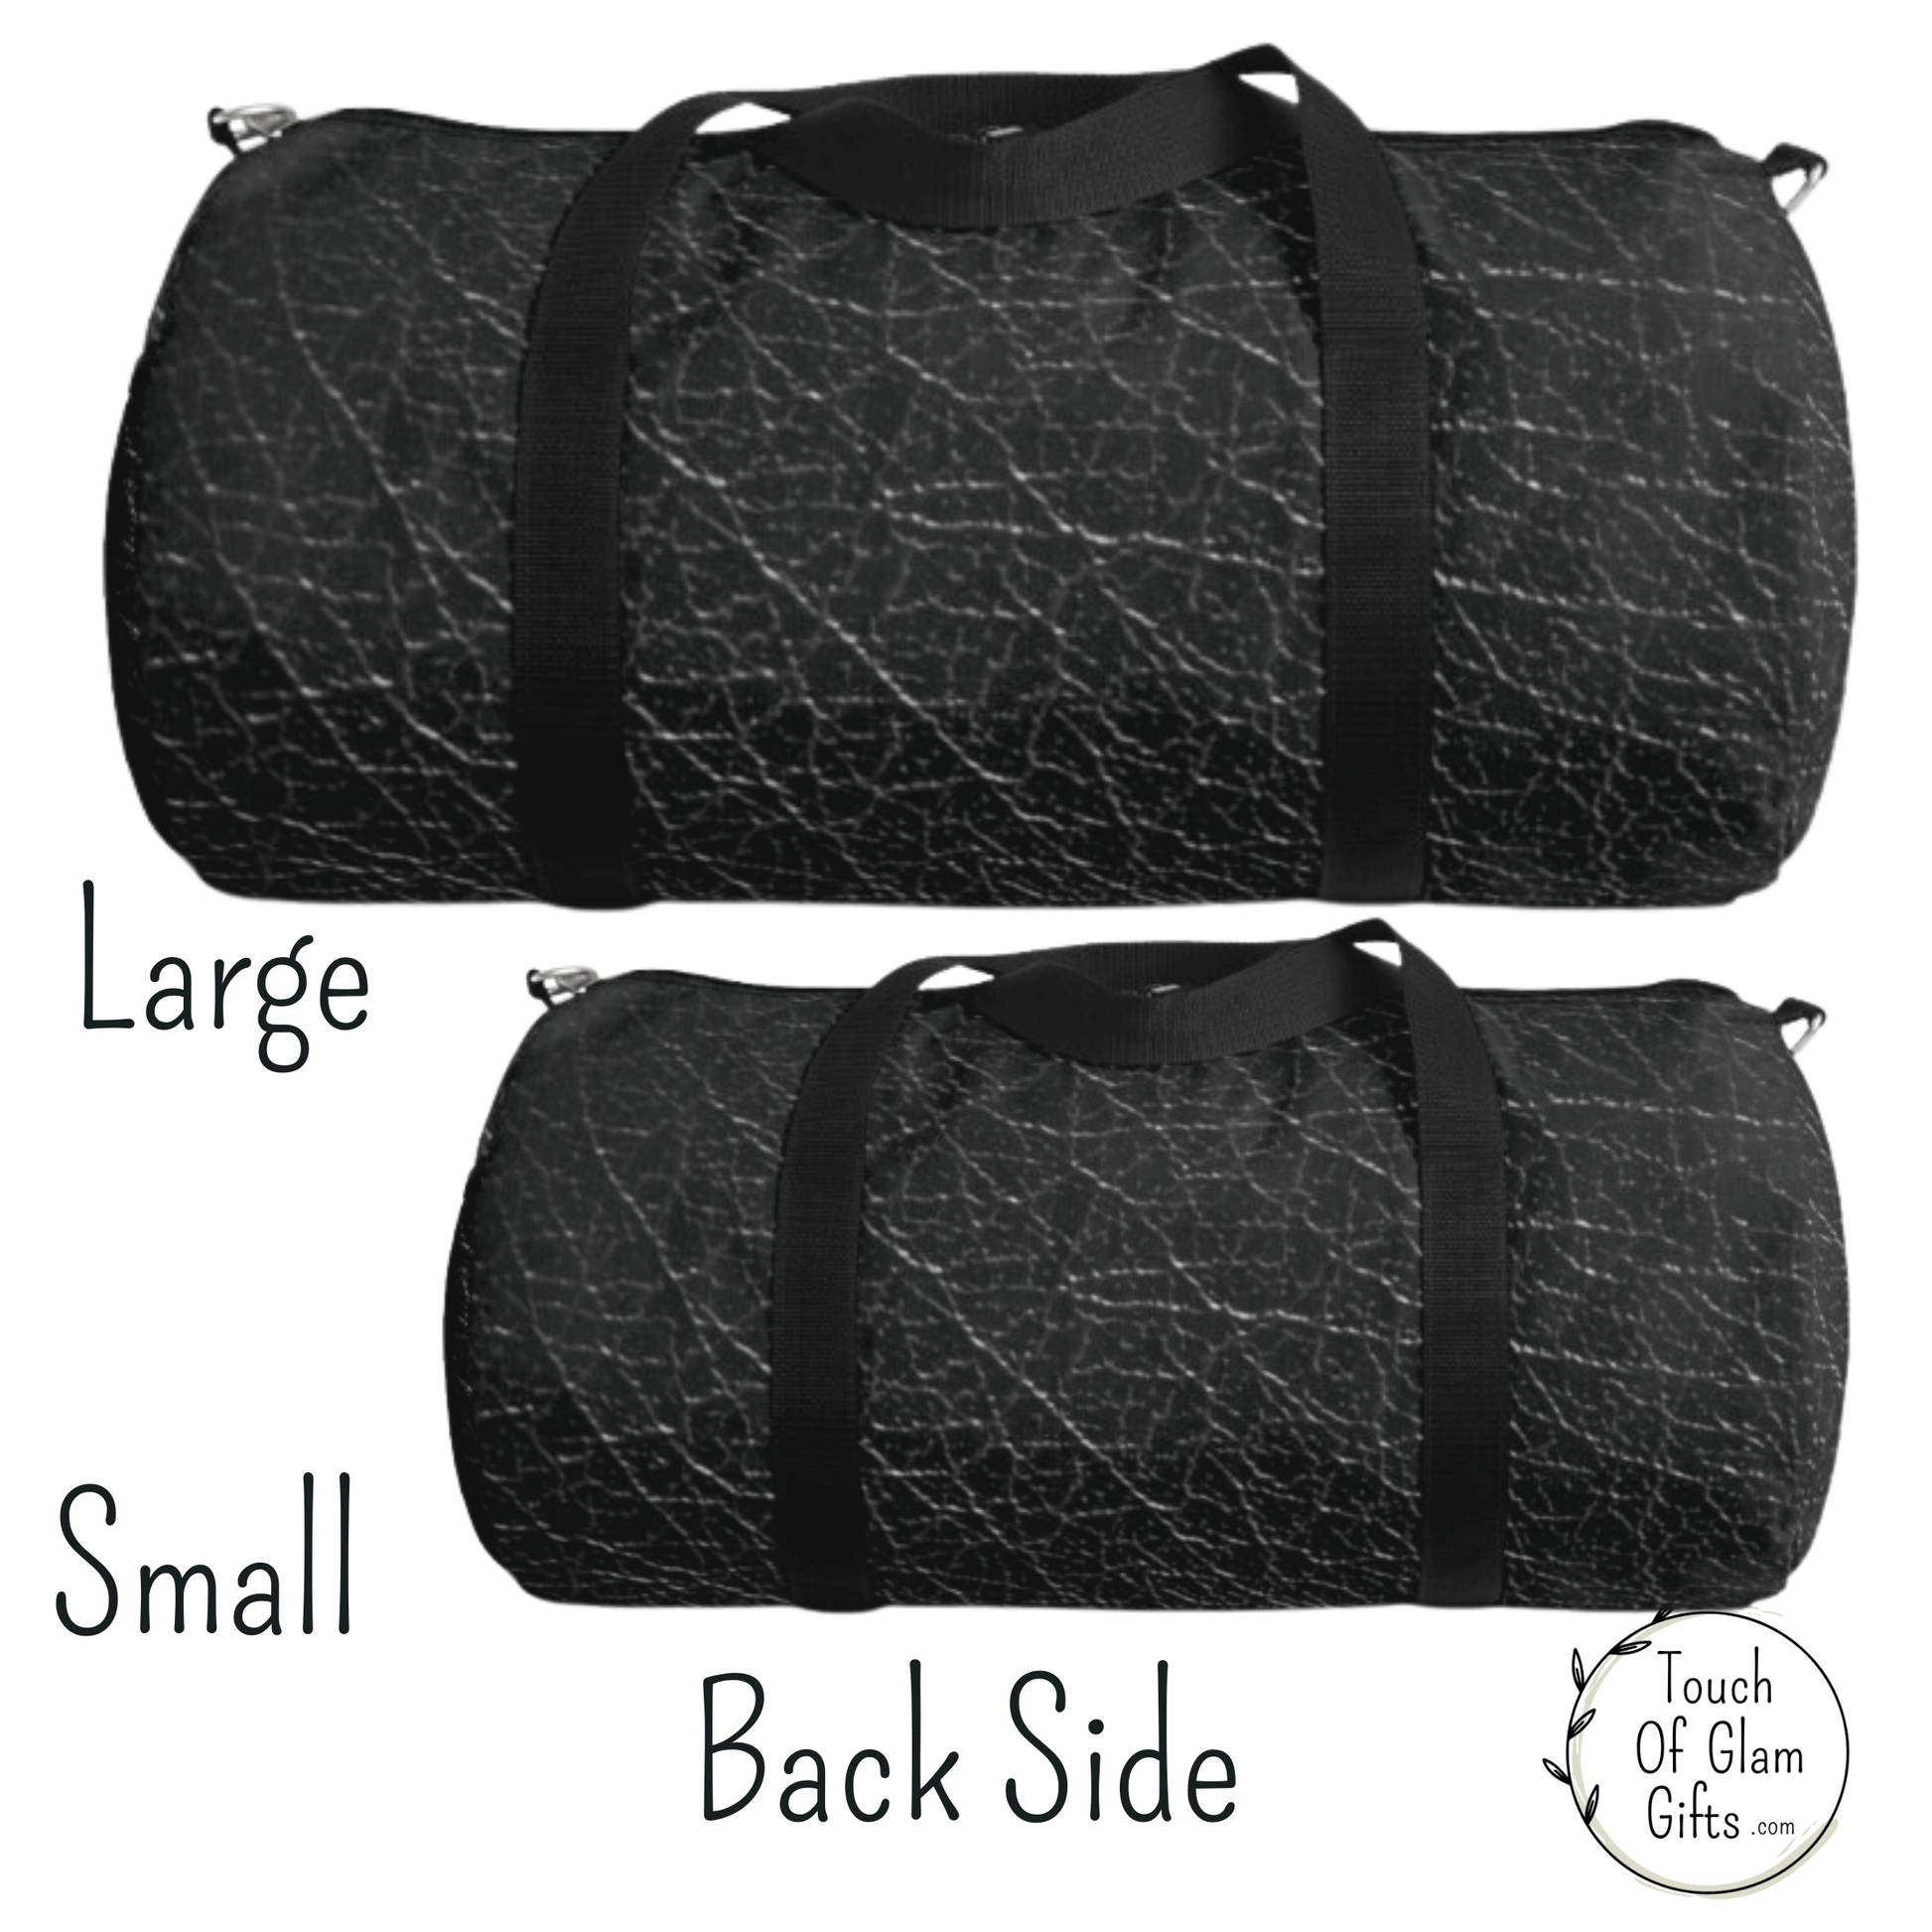 The back side of our mens duffel bag shows the printed leather print on canvas duffel bag.